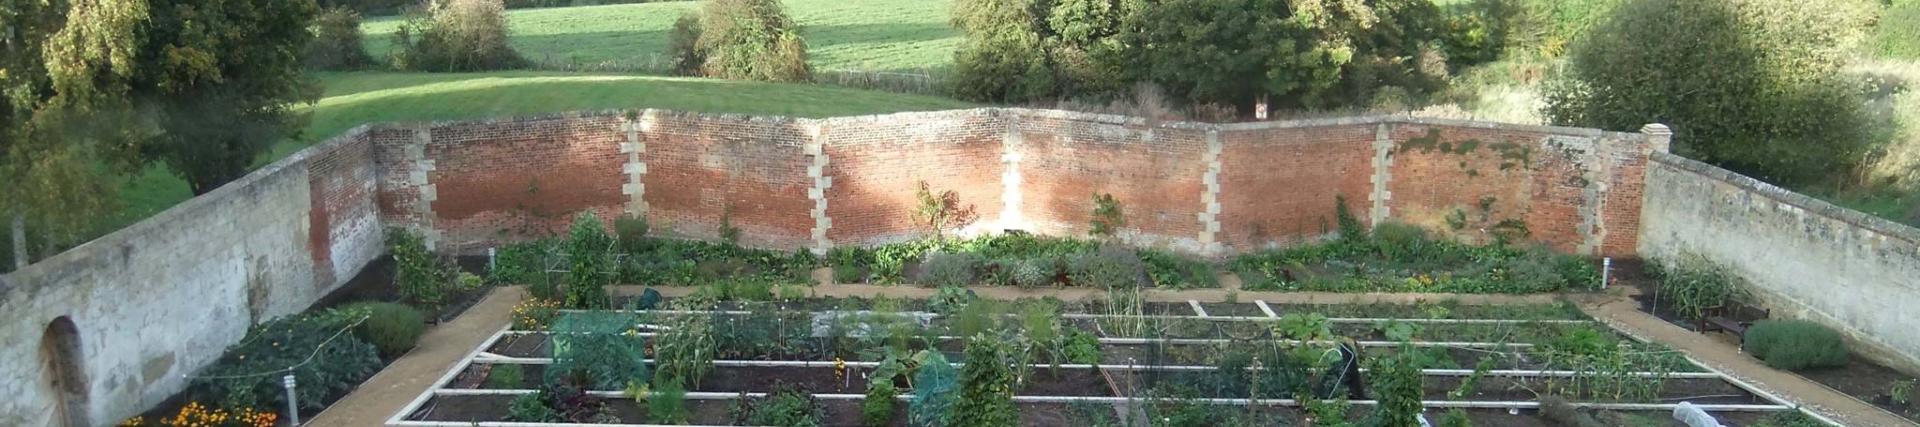 The full crinkle crankle shape of the walled garden. Inside the walls is vegetable beds and beyond the walls is green fields and trees.